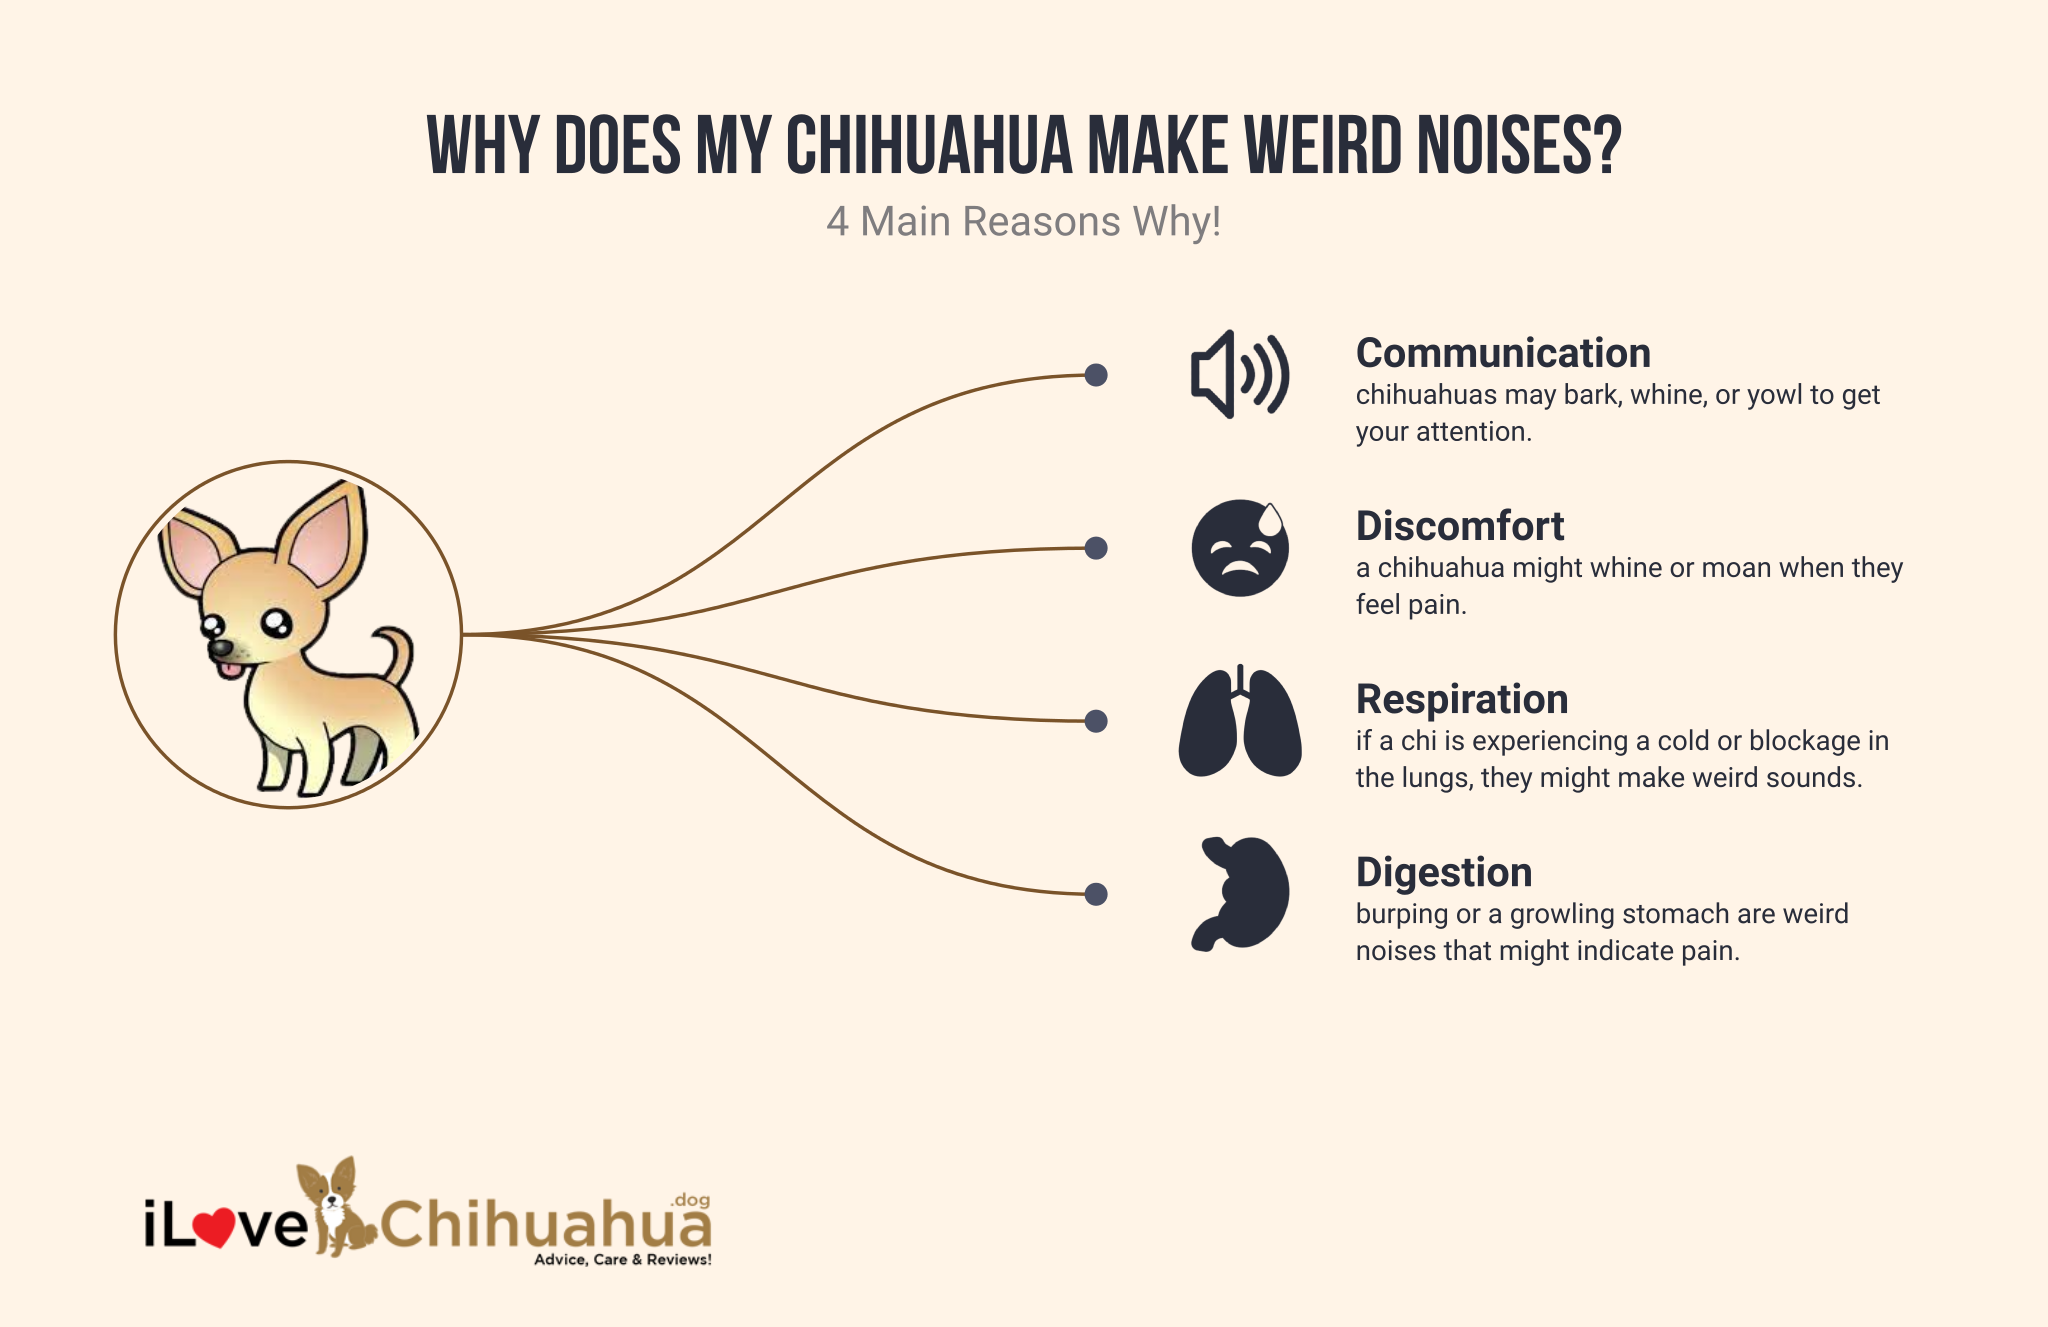 Why Does My Chihuahua Make Weird Noises infographic